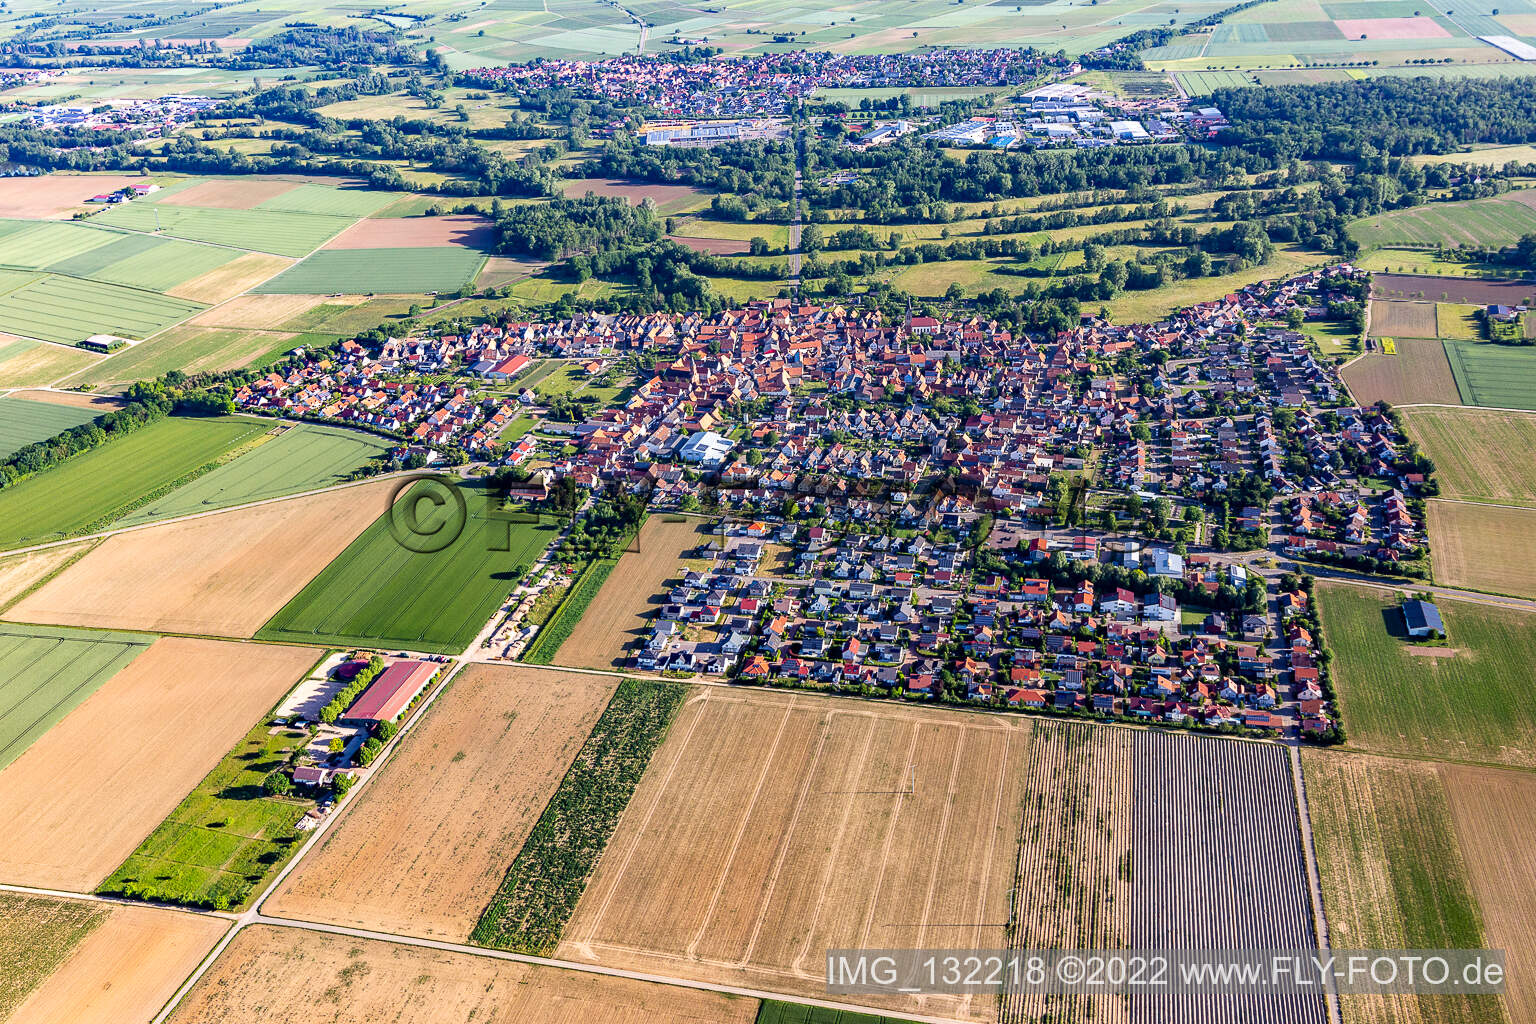 Steinweiler in the state Rhineland-Palatinate, Germany seen from a drone